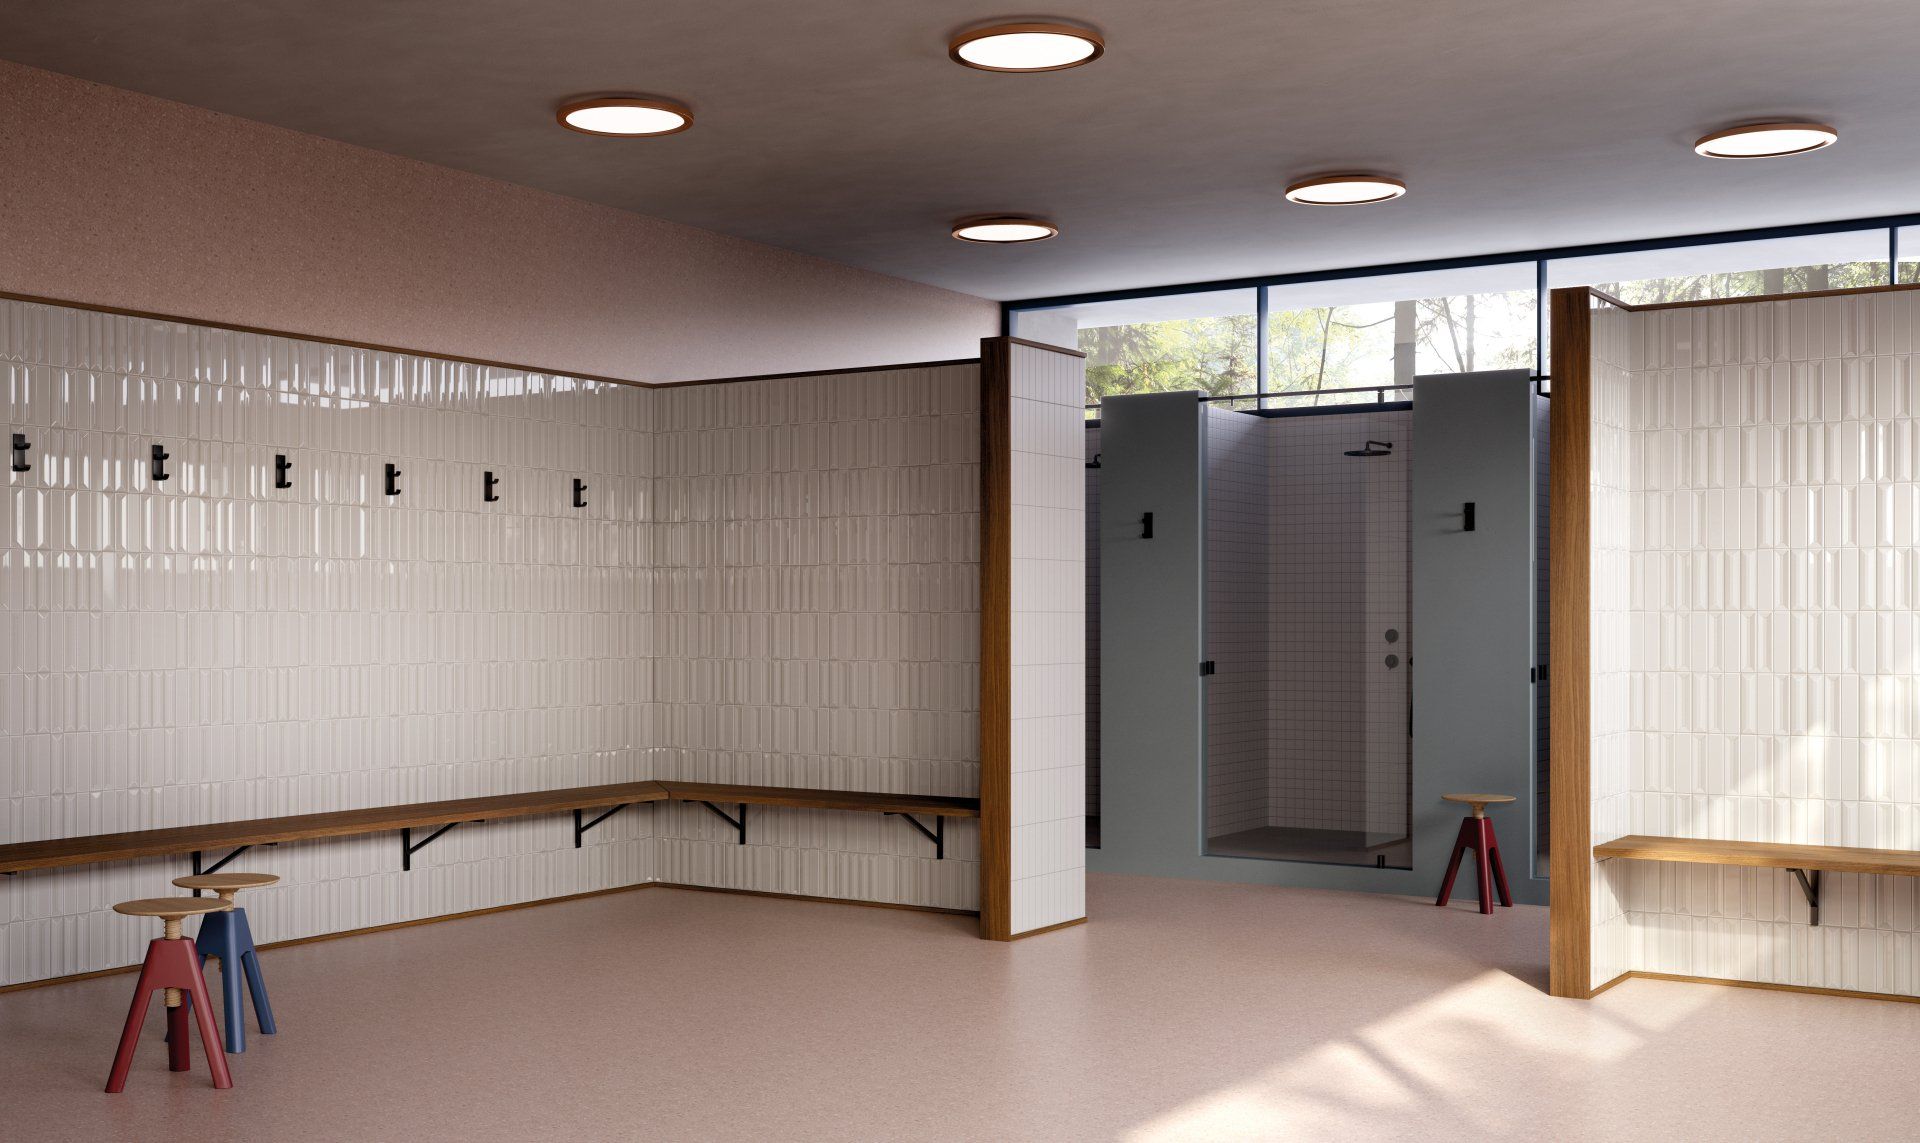 fluted 3d tiles used in a gym changing room with wooden benches and wooden beams as a decorations.